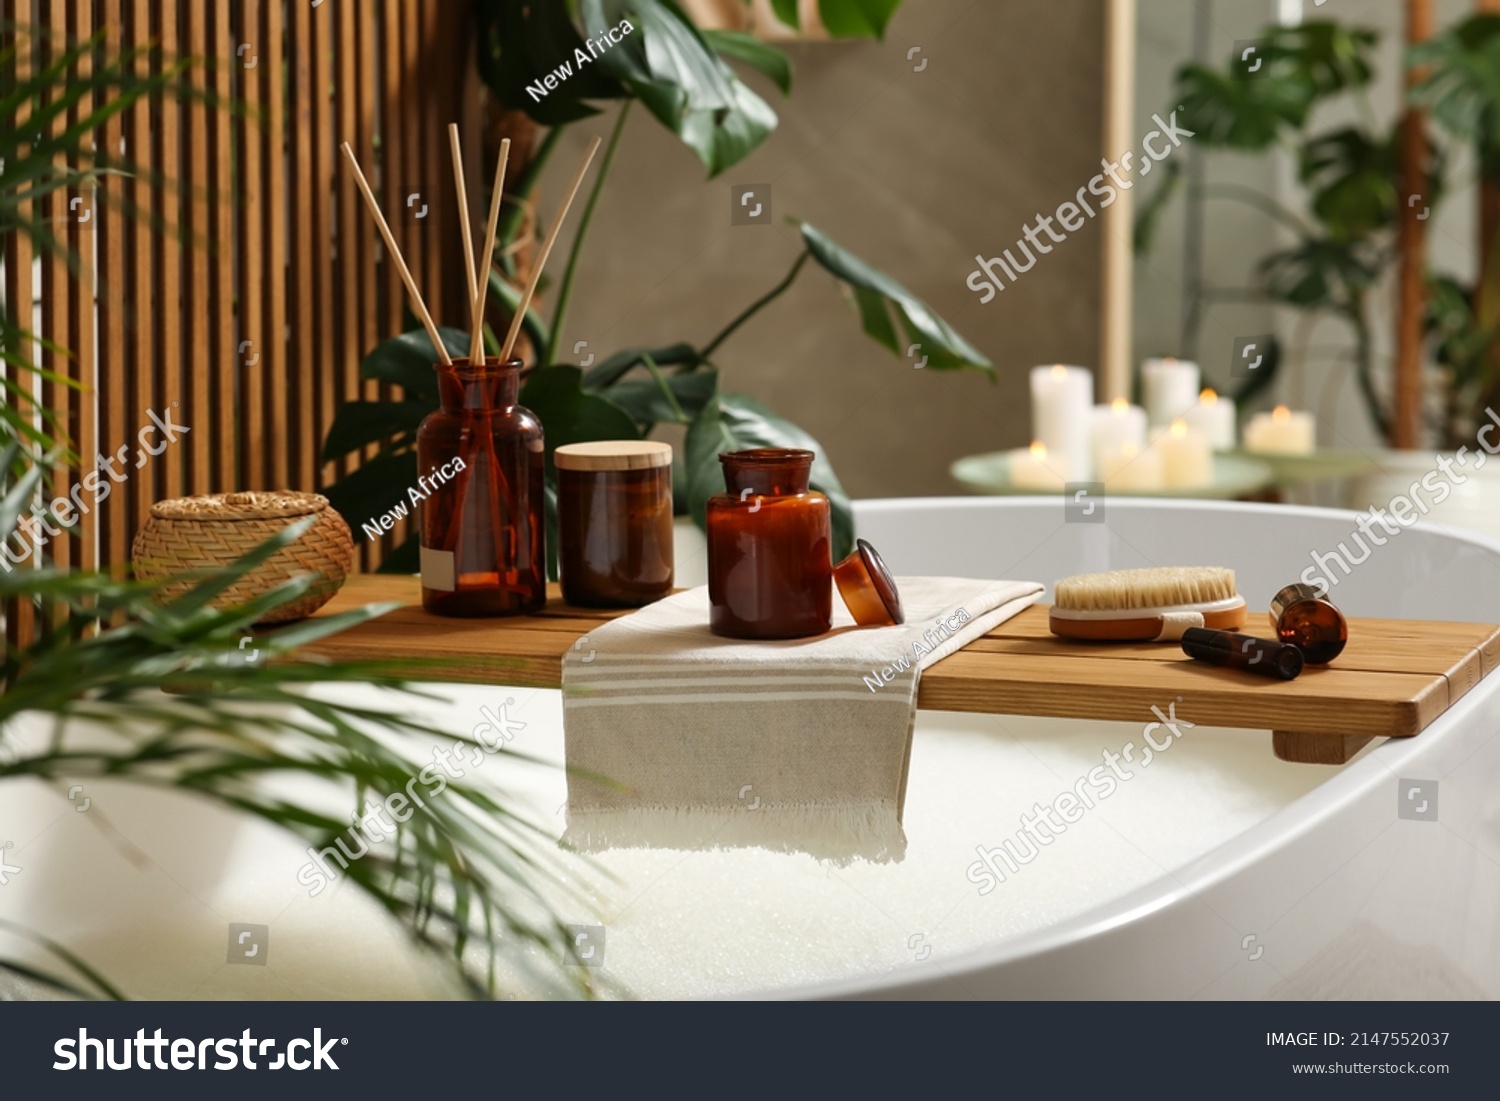 Wooden bath tray with open book, candle and body care products on tub indoors. Relaxing atmosphere #2147552037